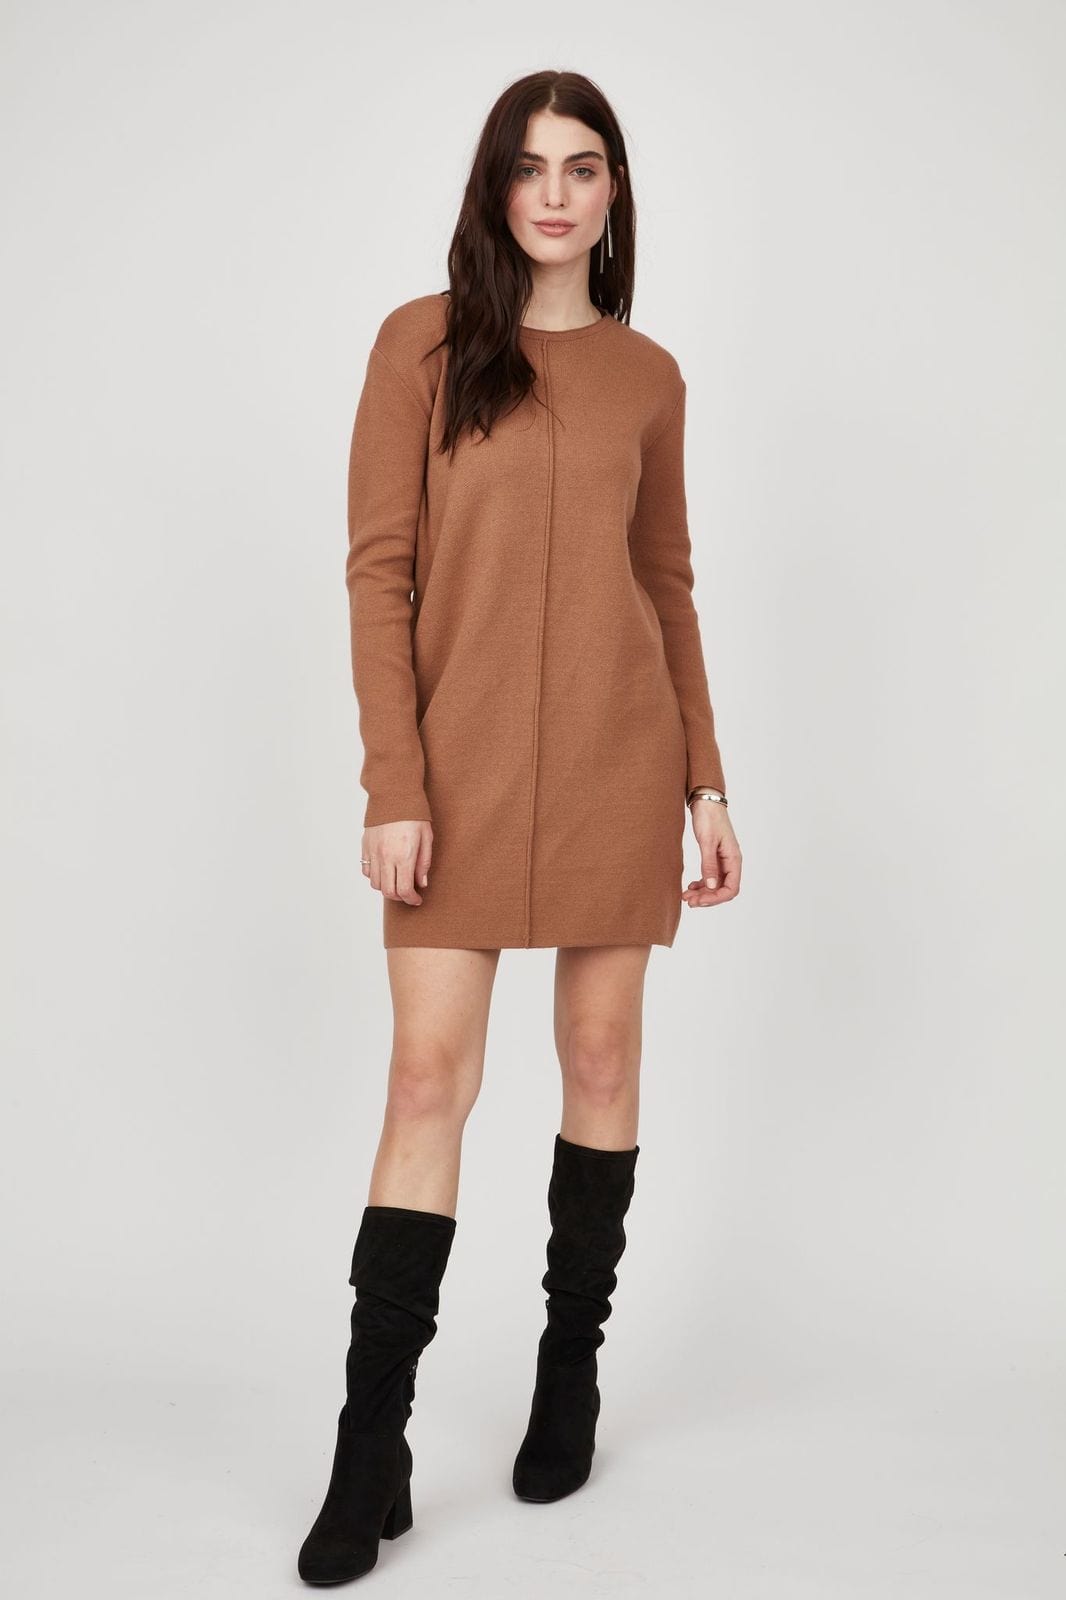 Pistache Knit Dress With Front Seam